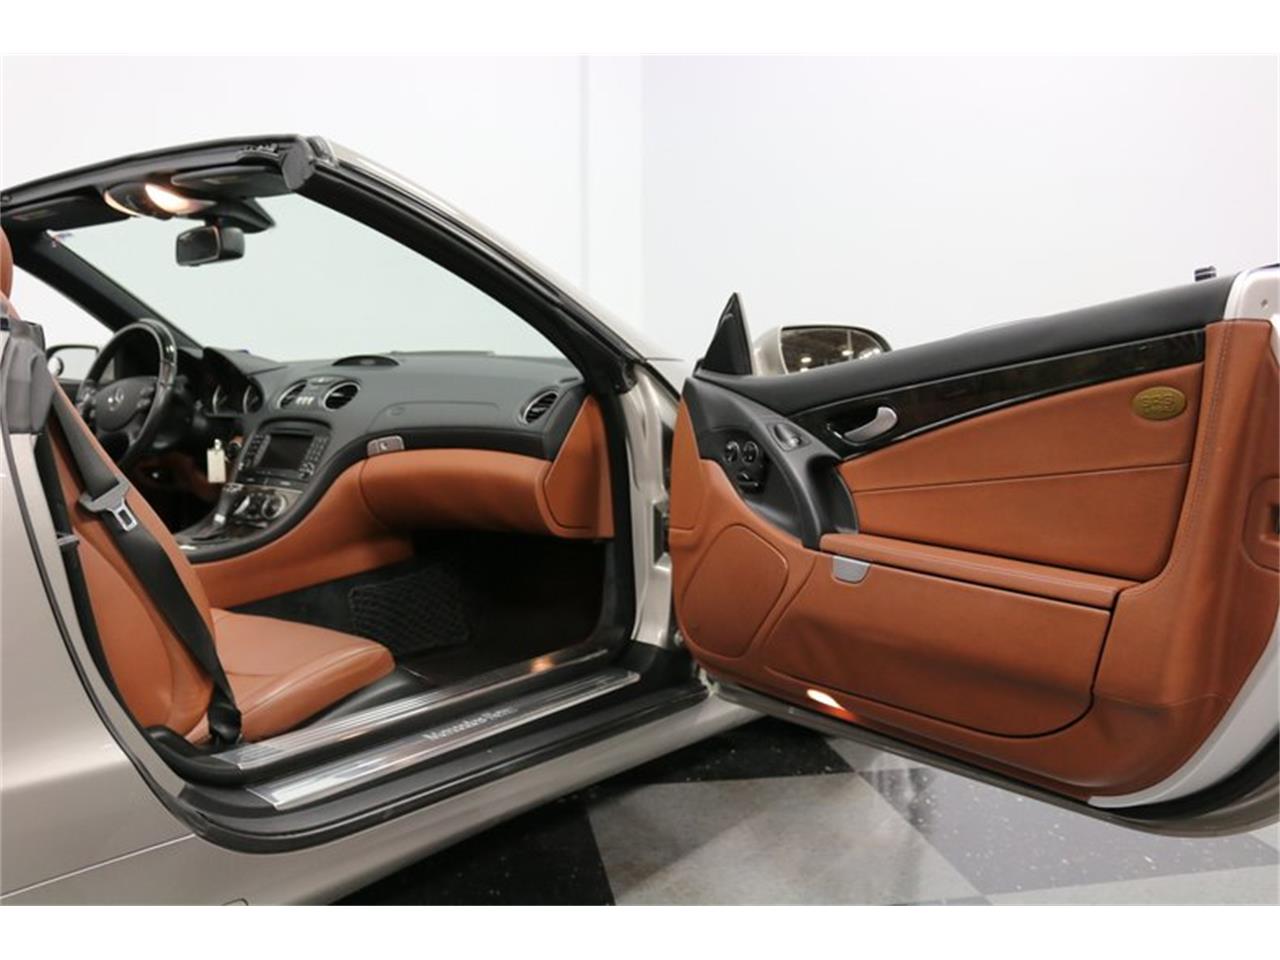 2007 Mercedes-Benz SL550 for sale in Fort Worth, TX – photo 65